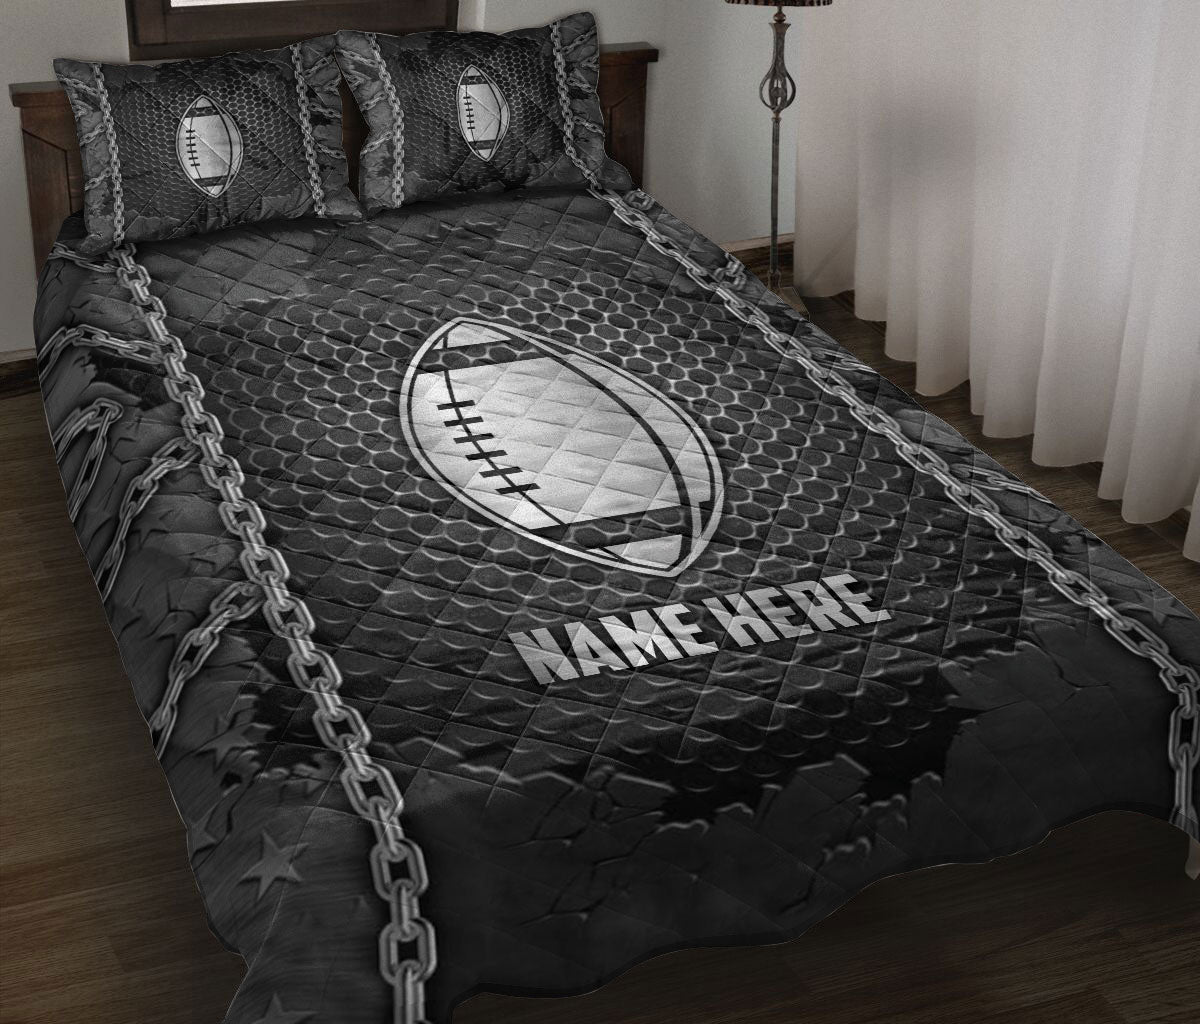 Ohaprints-Quilt-Bed-Set-Pillowcase-American-Football-Iron-Chain-Pattern-Unique-Gifts-Custom-Personalized-Name-Blanket-Bedspread-Bedding-1142-Throw (55'' x 60'')